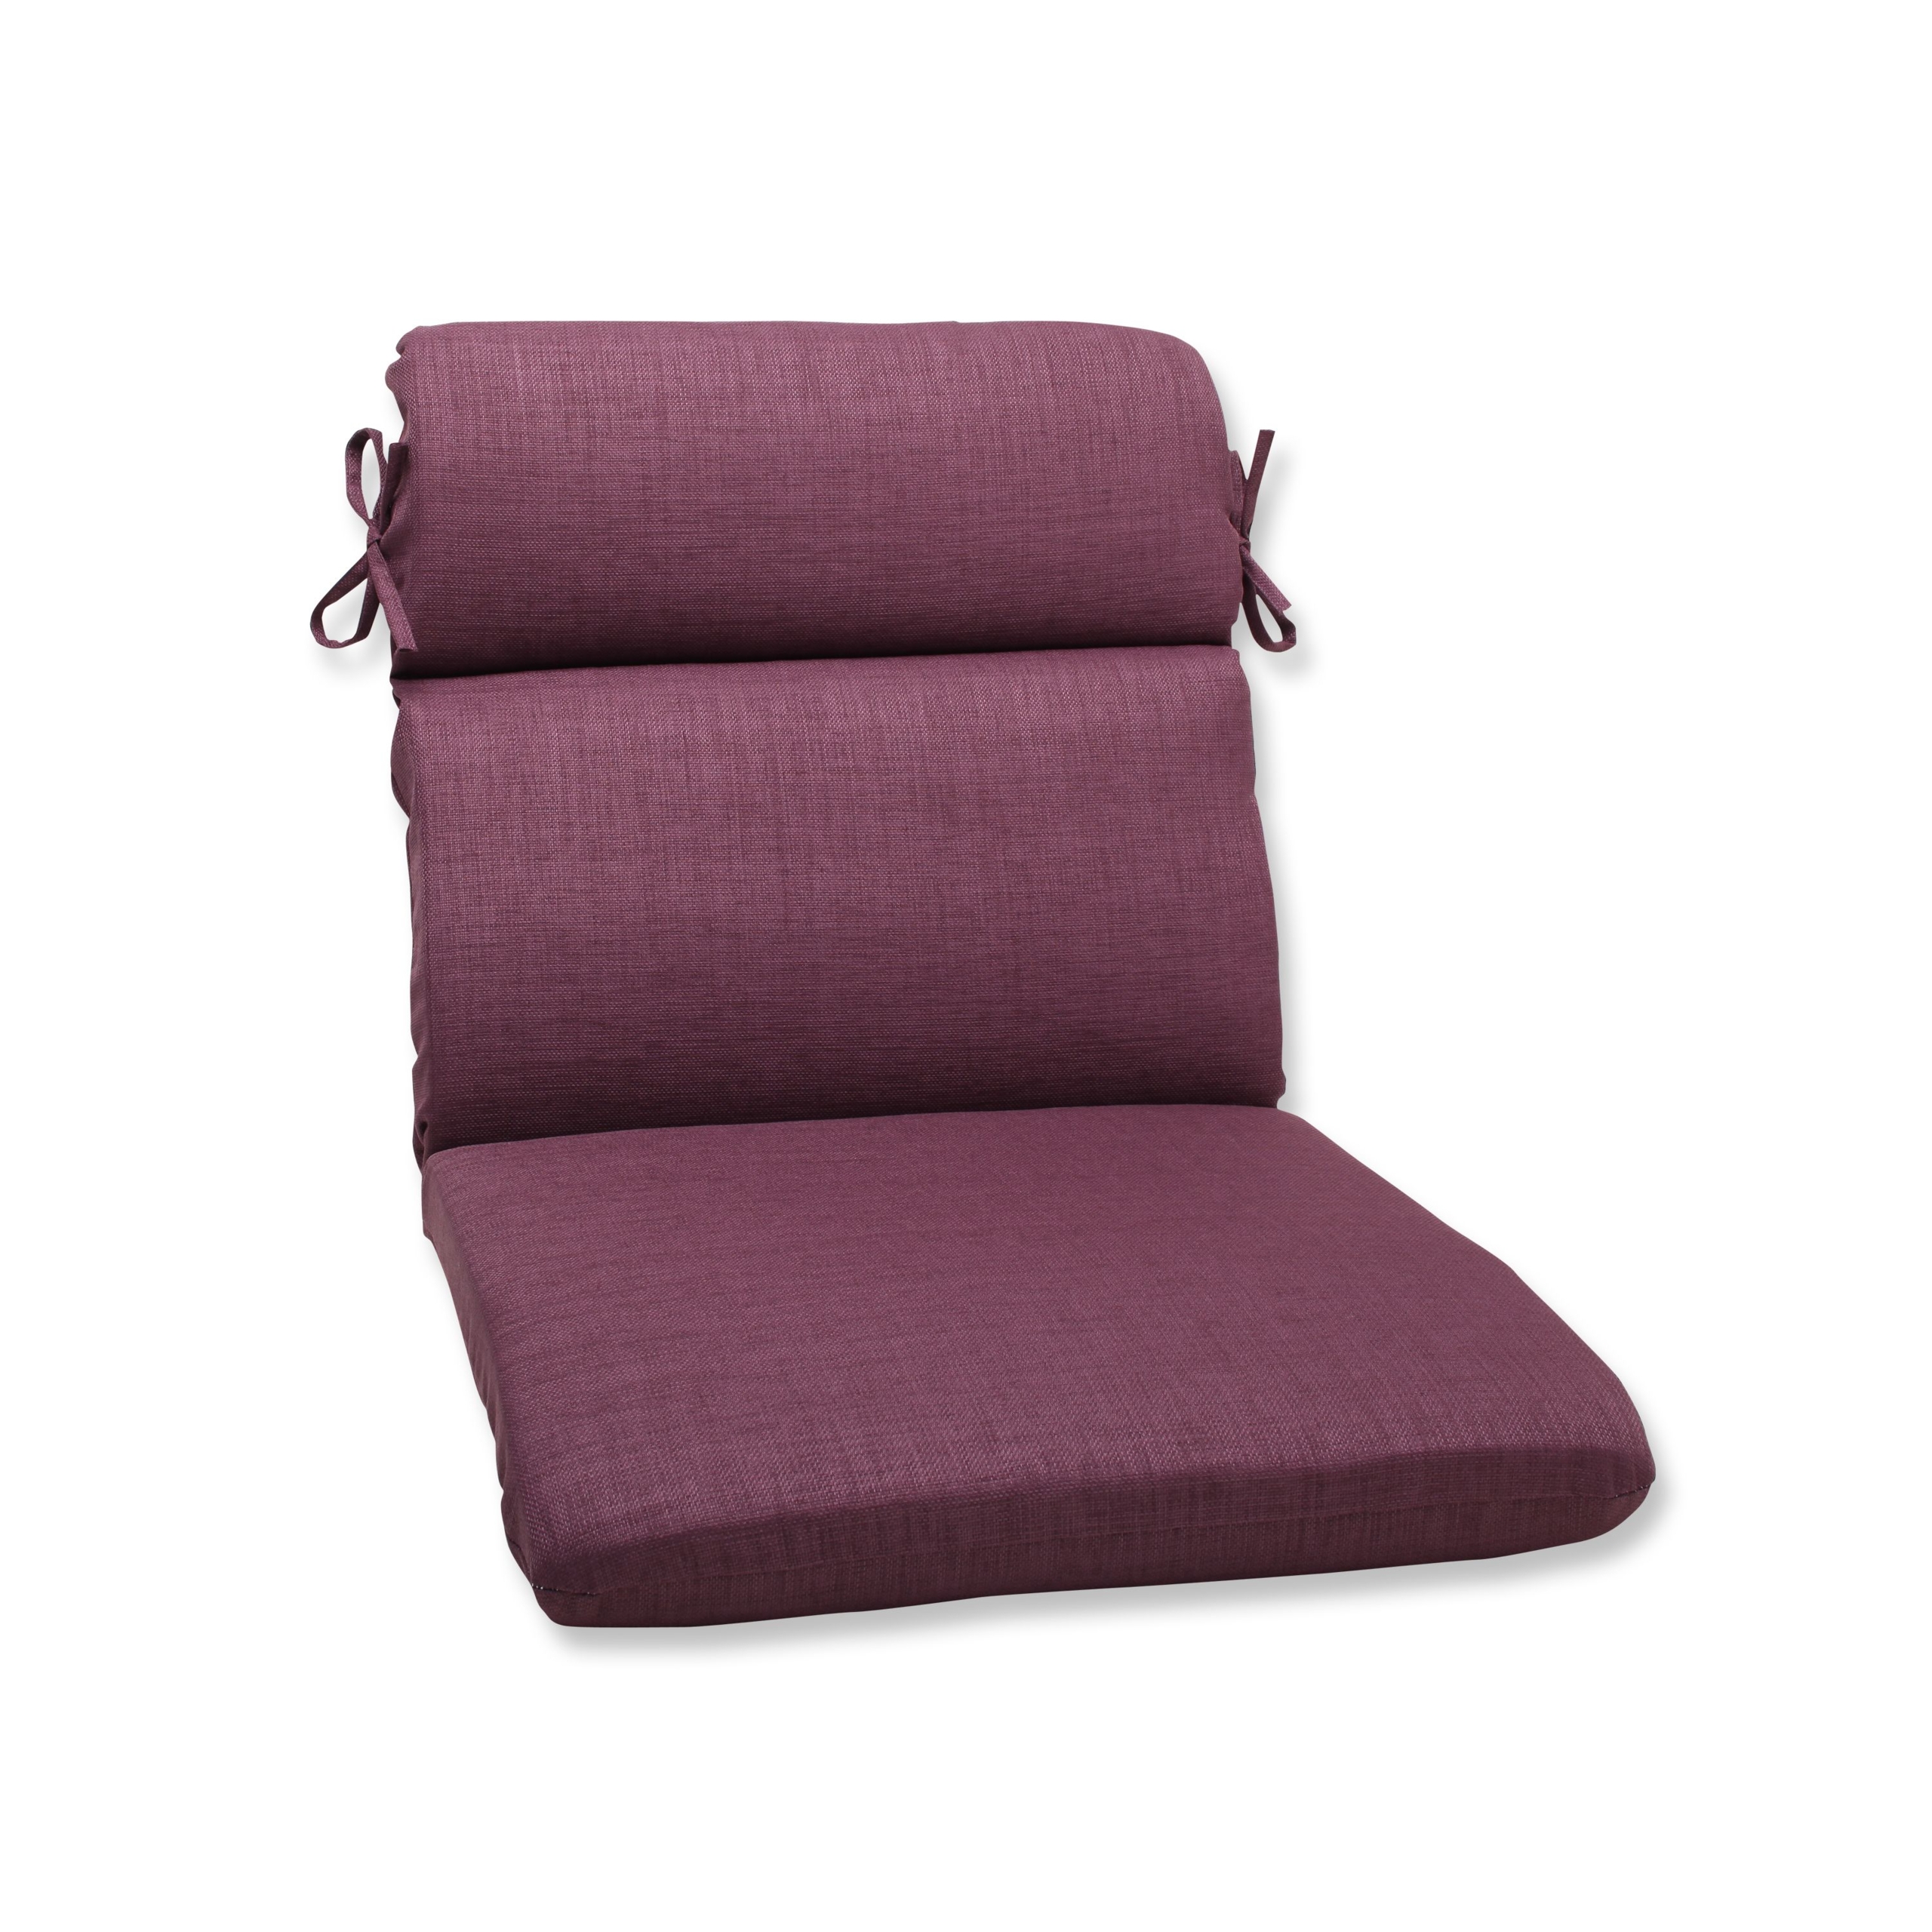 Pillow Perfect Outdoor Rave Vineyard Rounded Corners Chair Cushion